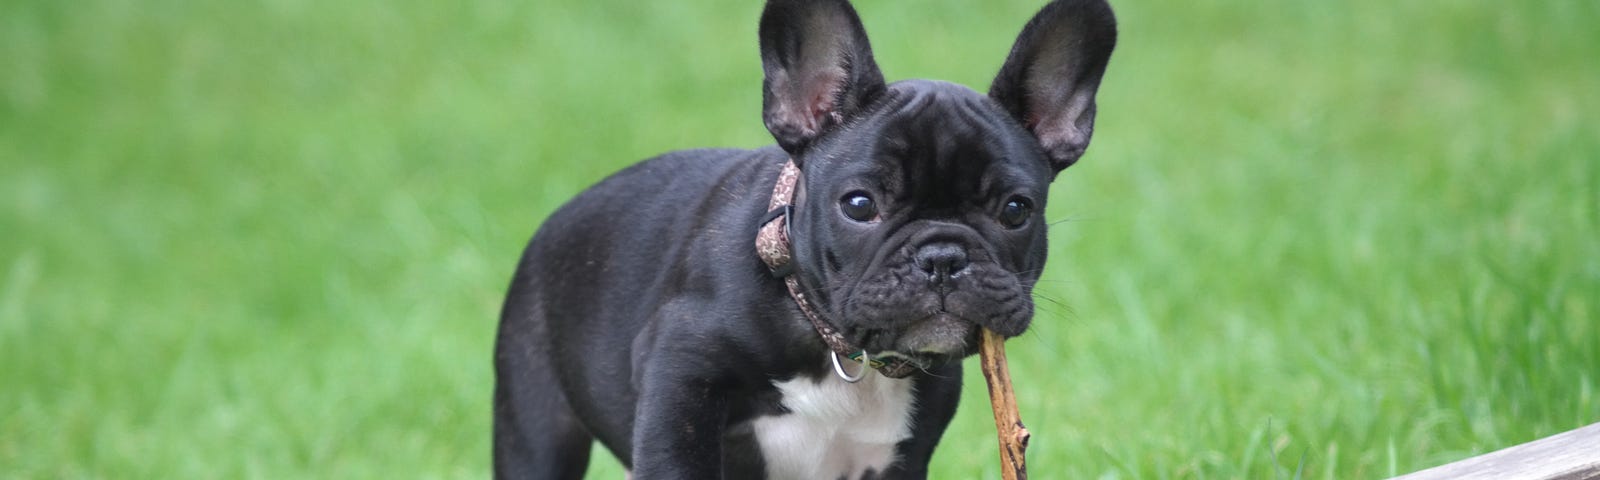 Black and white French Bulldog with stick in its mouth.